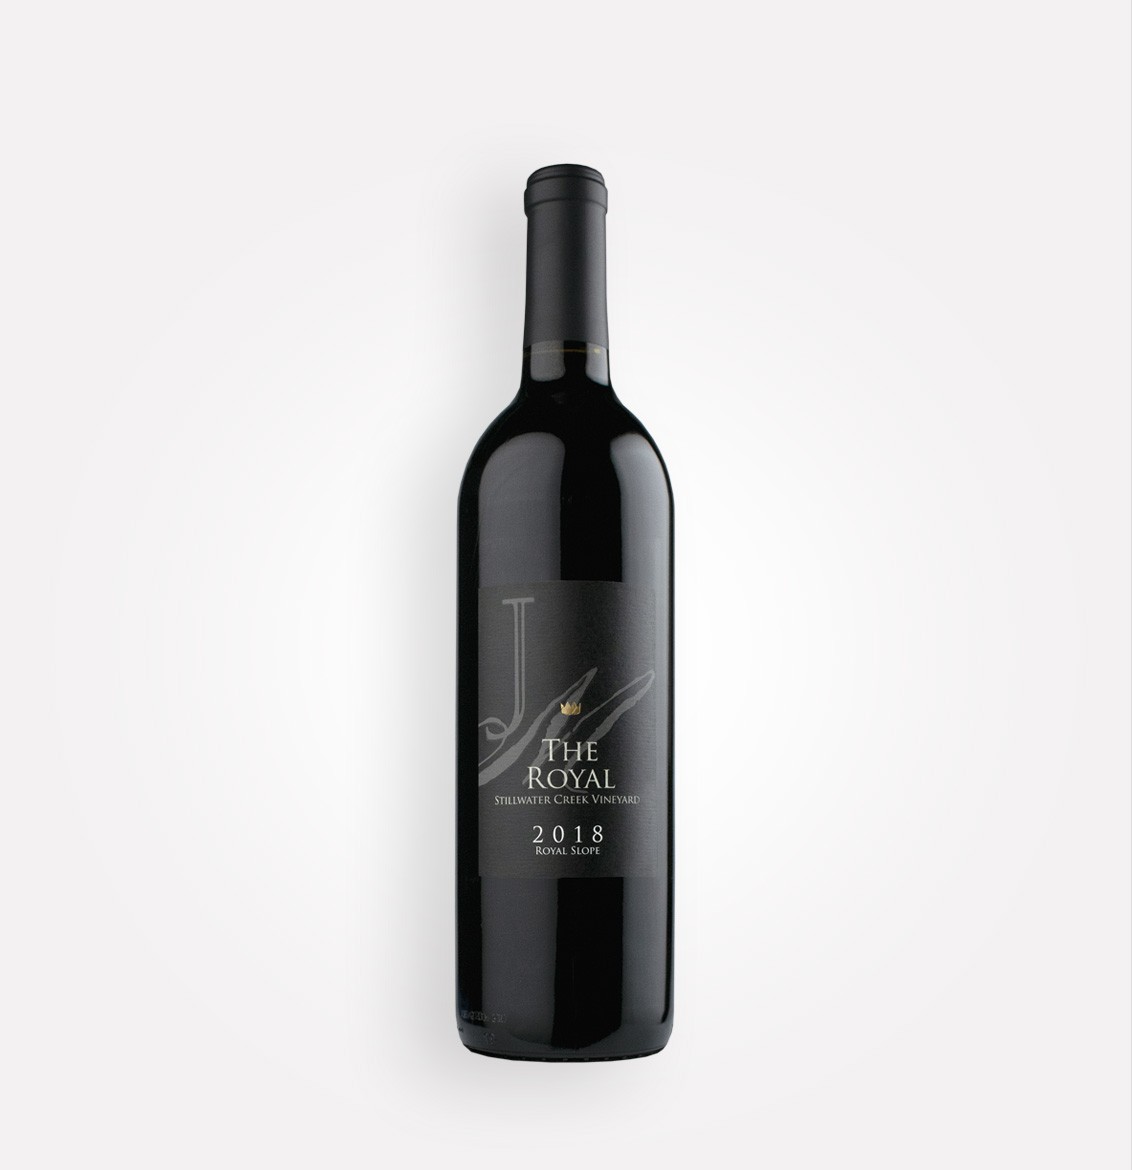 Bottle of JM Cellars 2018 The Royal red wine blend from Washington's Royal Slope AVA in the Columbia Valley